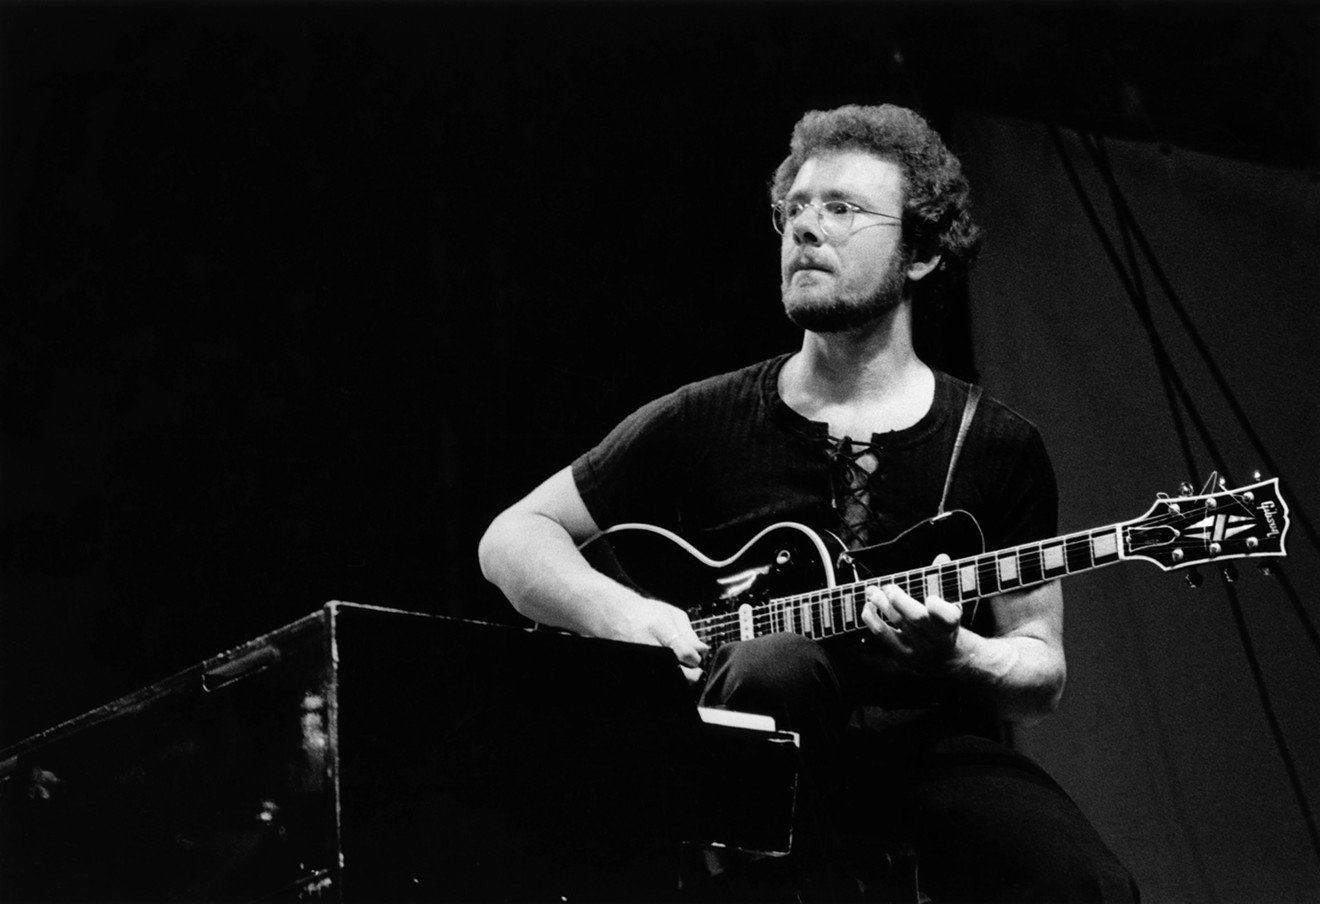 Band leader Robert Fripp put the "dick" in "dictator" but made King Crimson the perfect band.